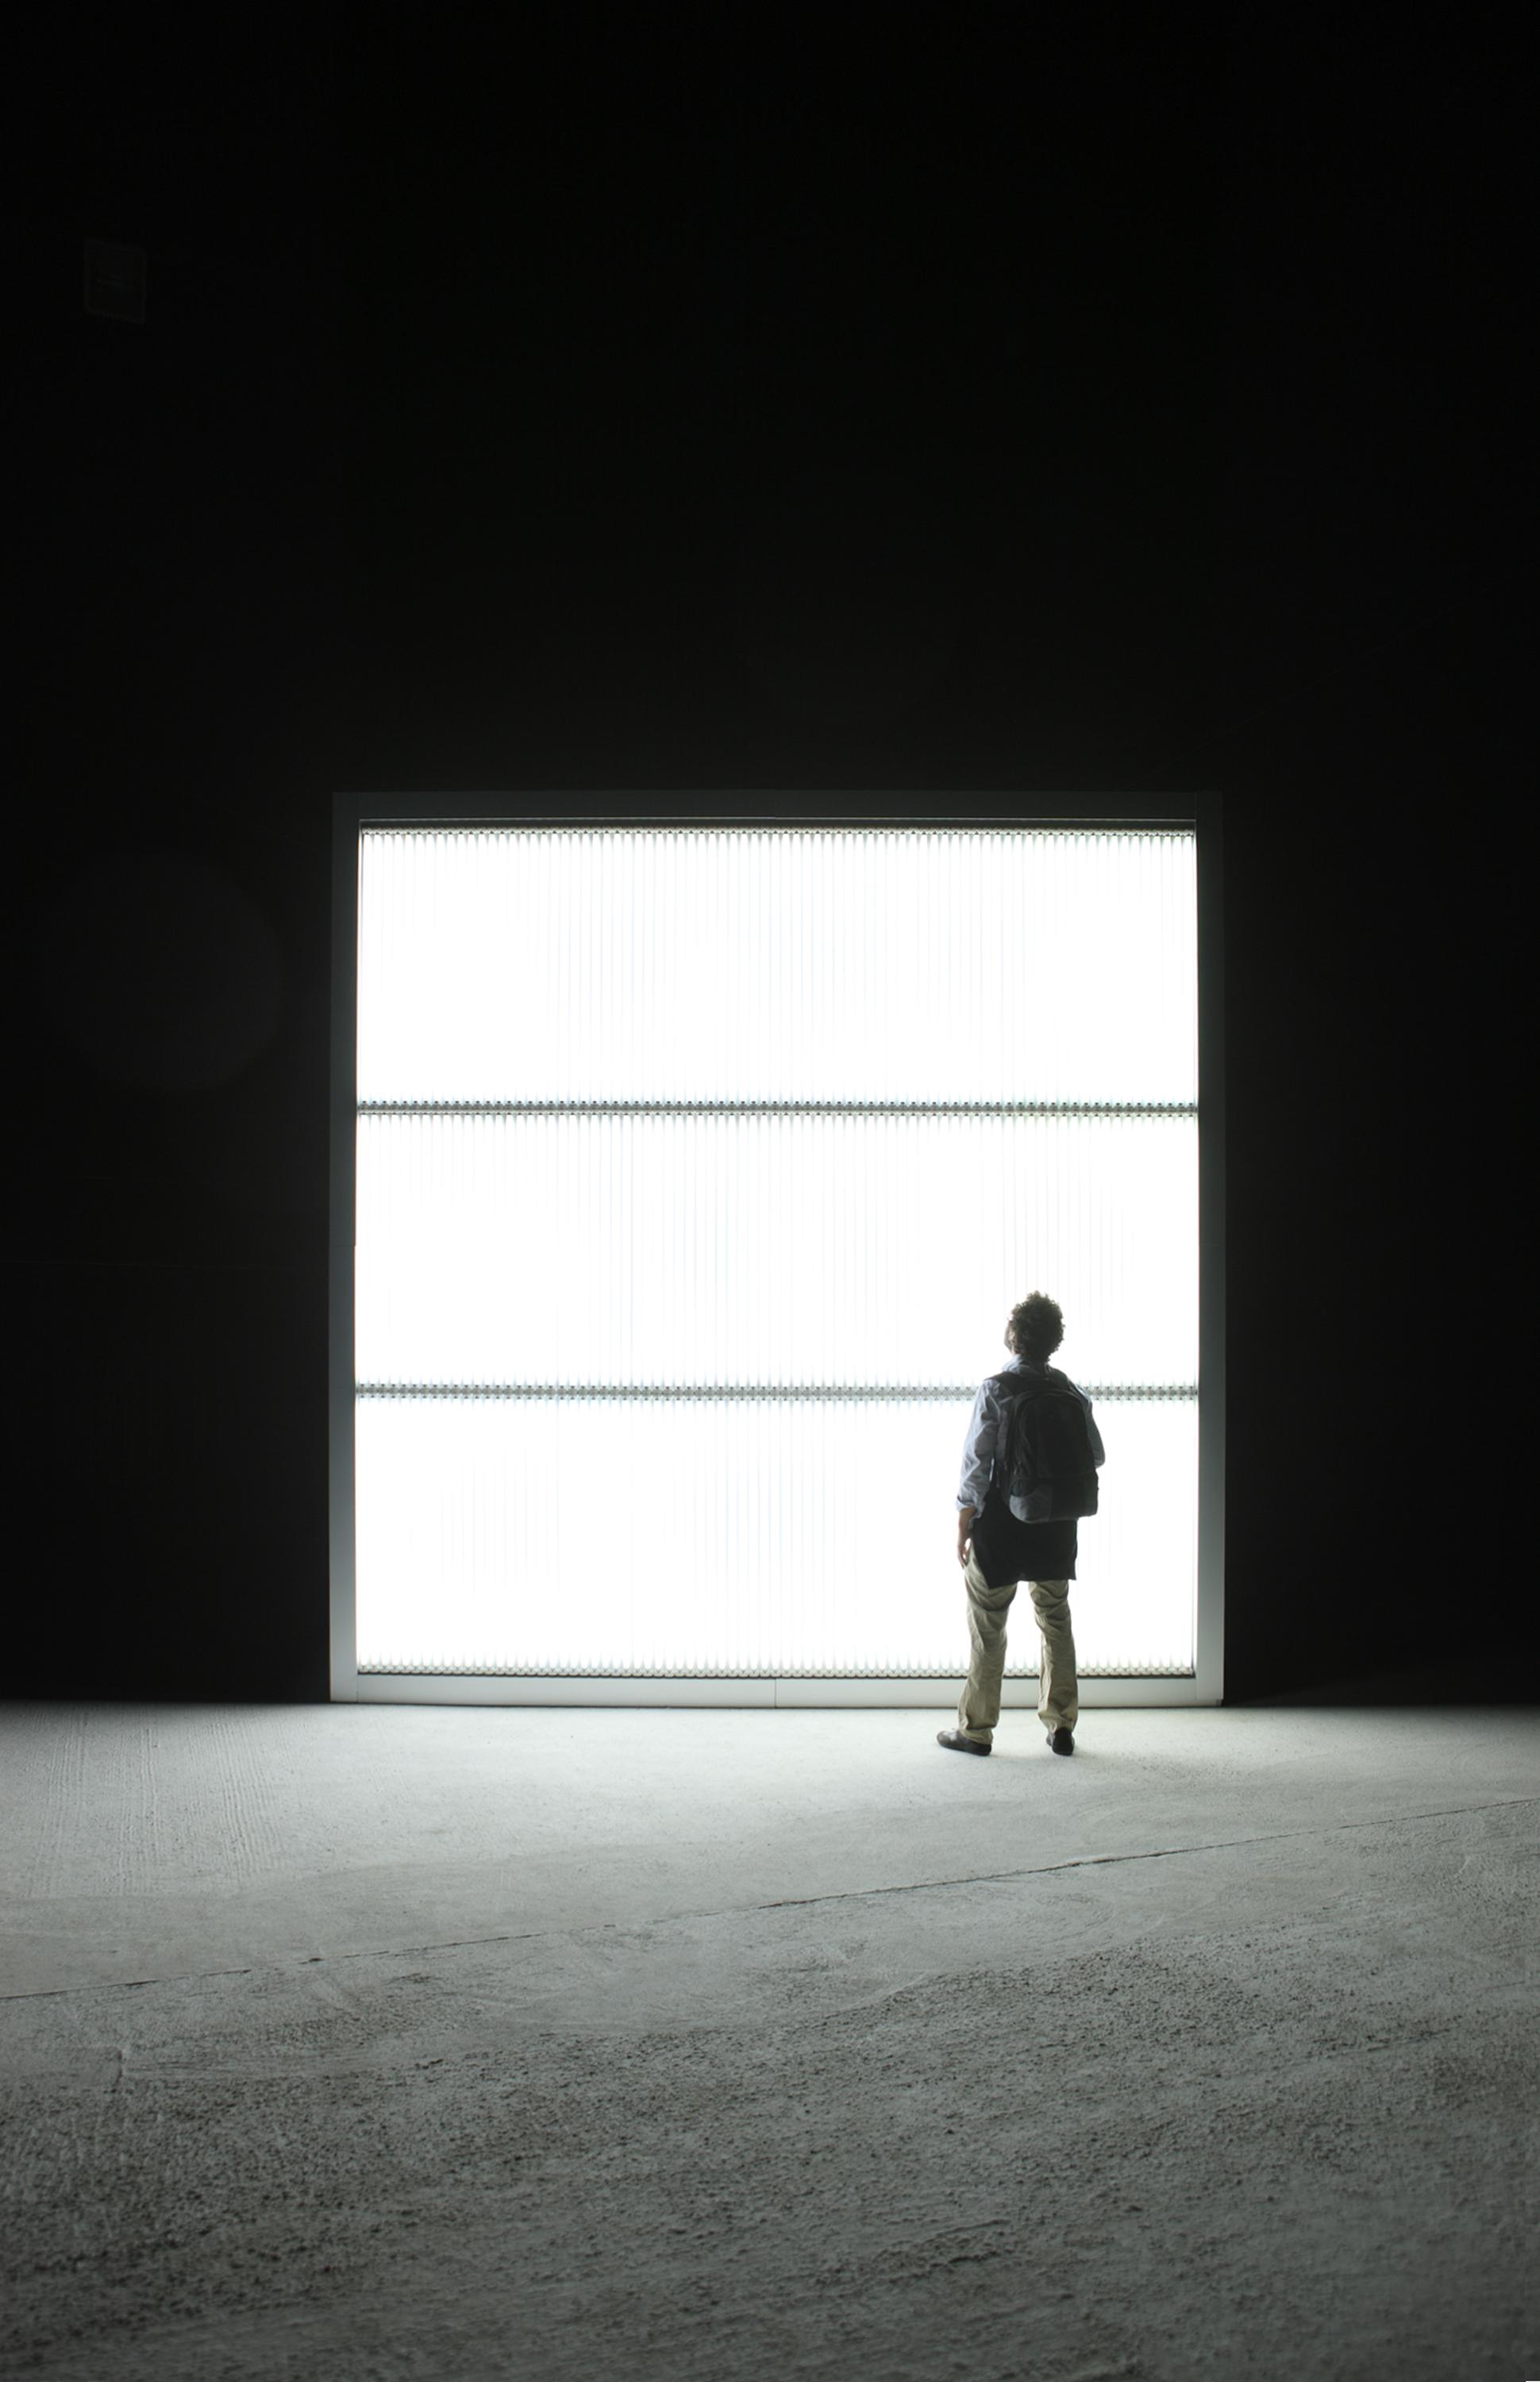 A person stands silhouetted in front of a square wall of fluorescent light in a dark space.